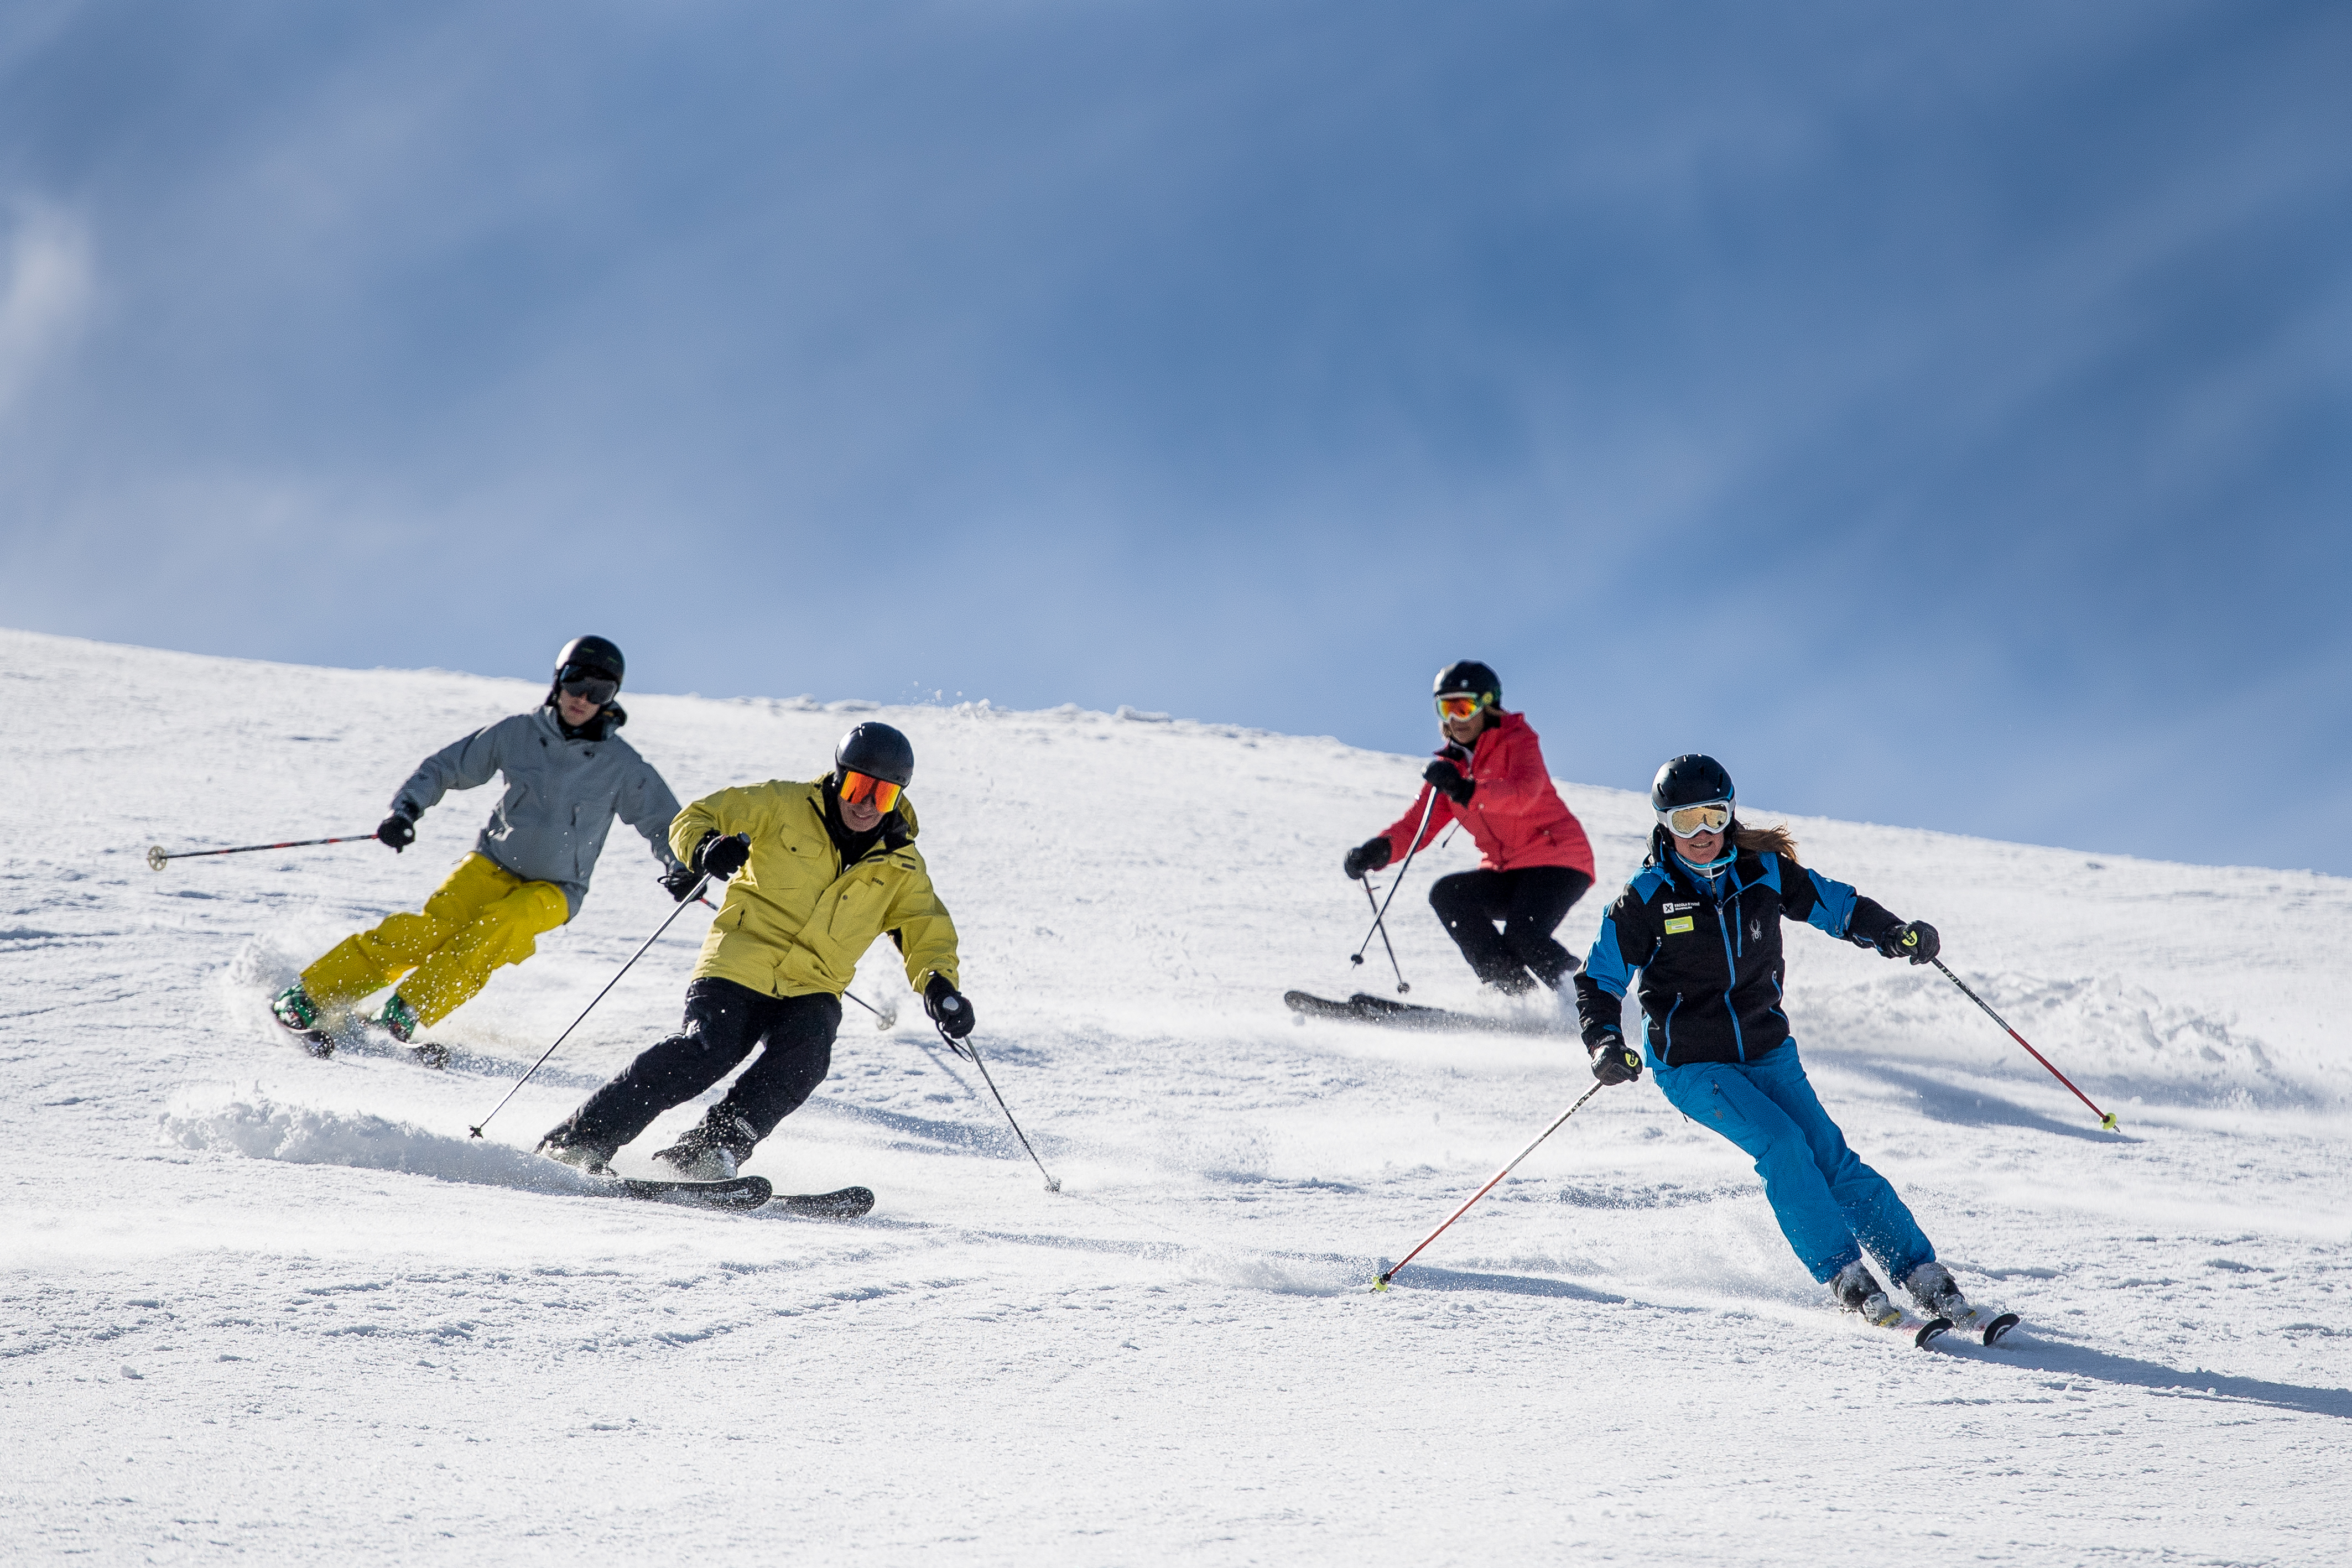 You can improve your ski technique with our advanced lessons